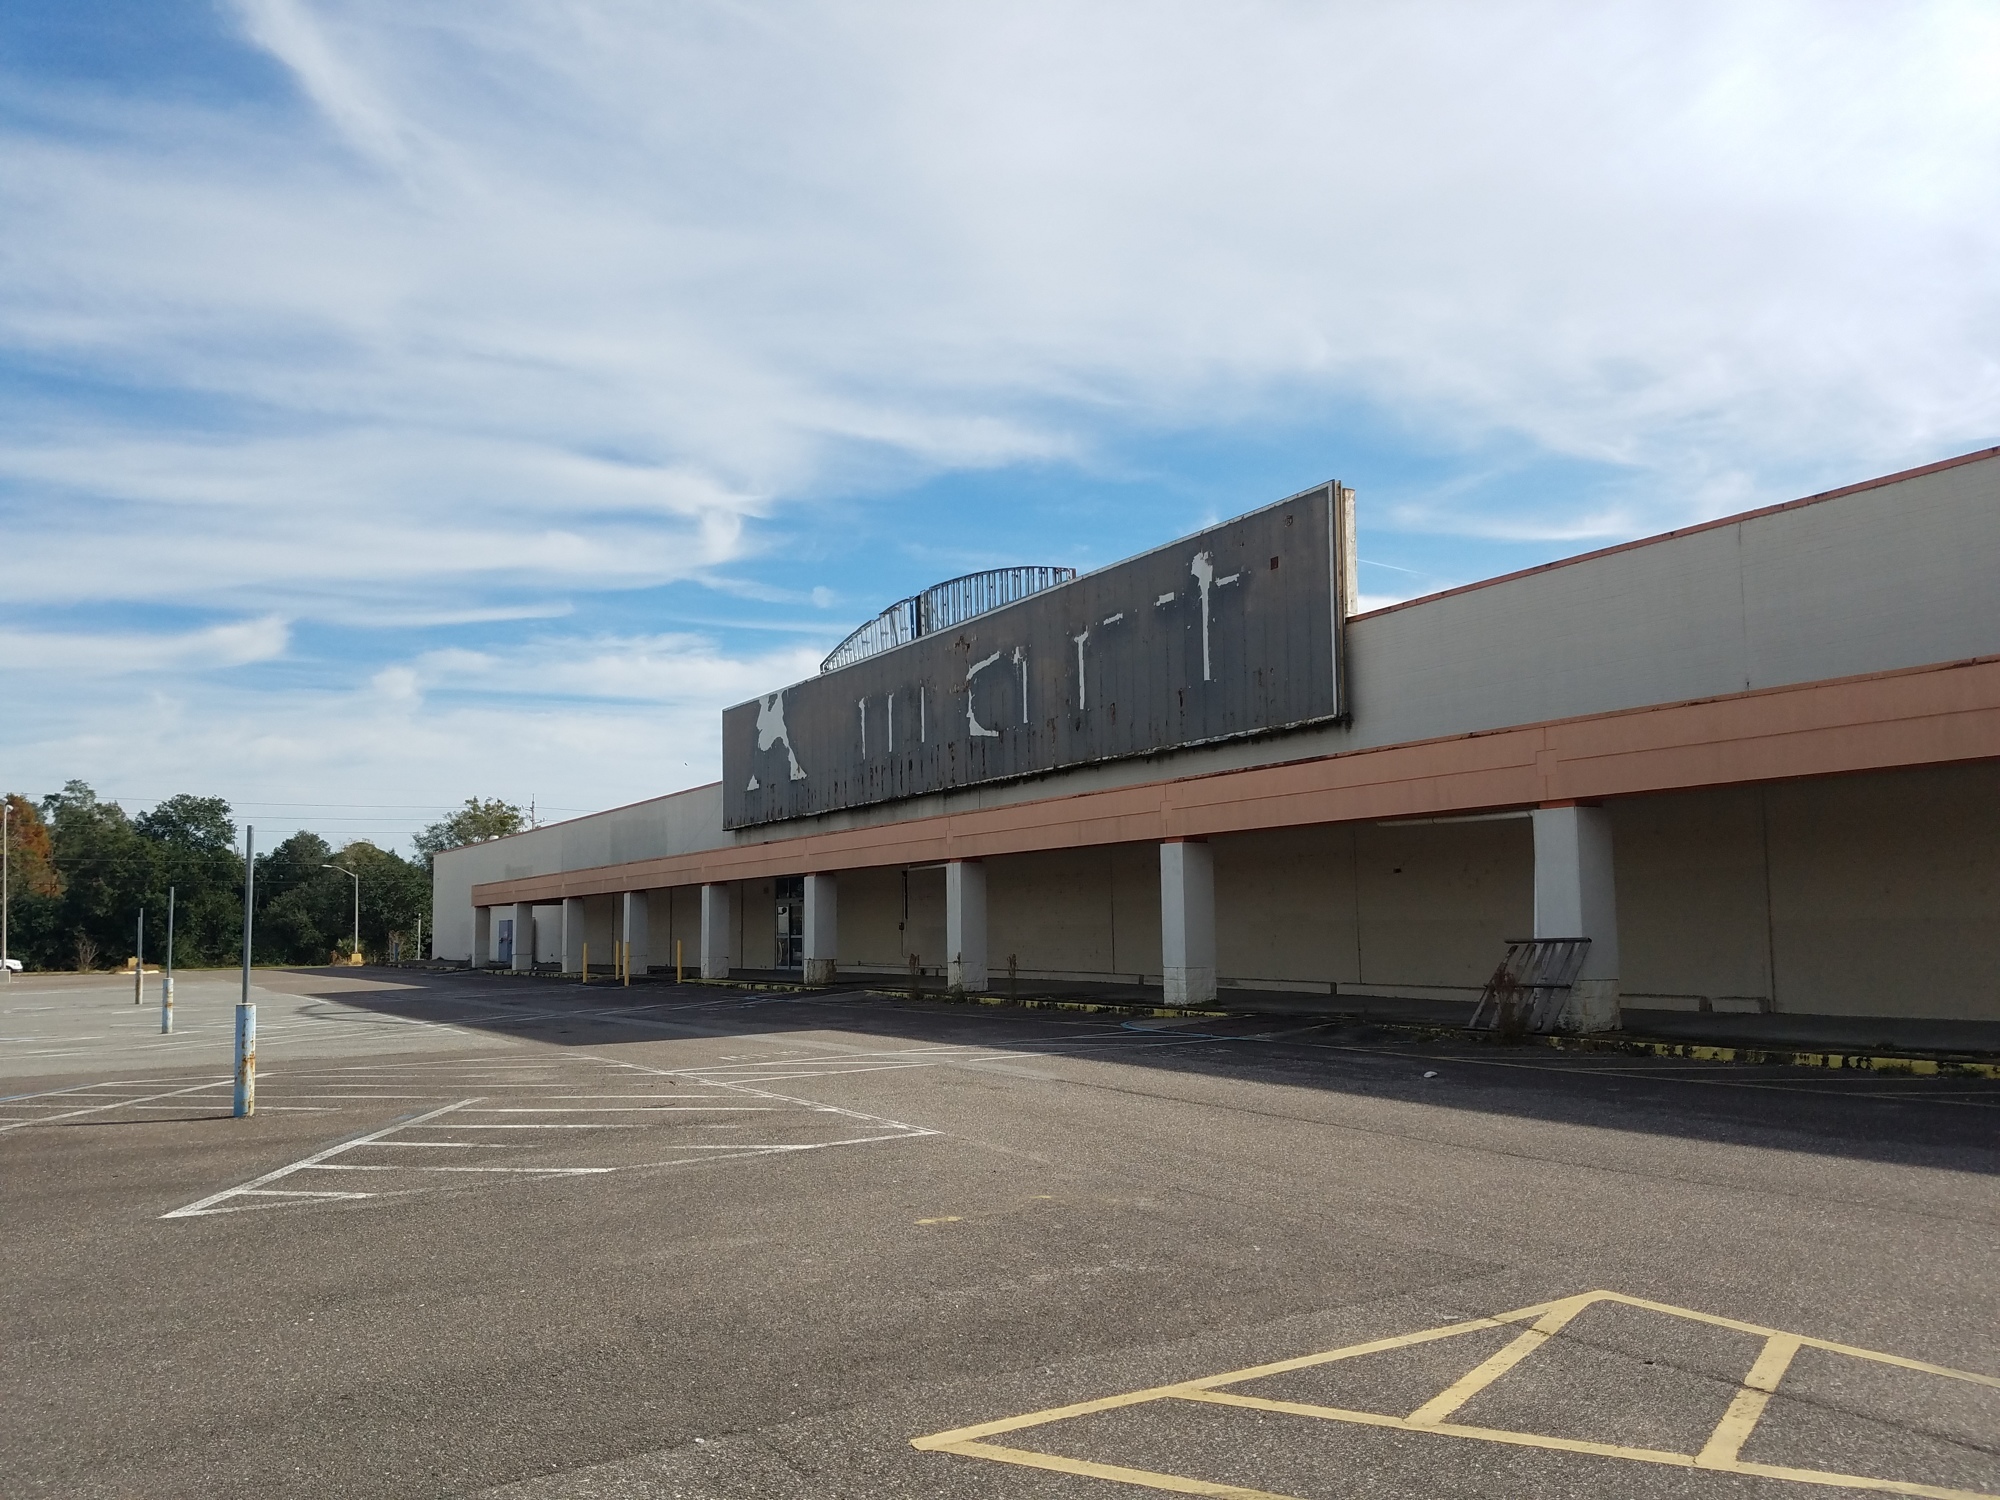 Amazon Logistics is renovating the former Kmart store at 4645 Blanding Blvd. into a delivery station.